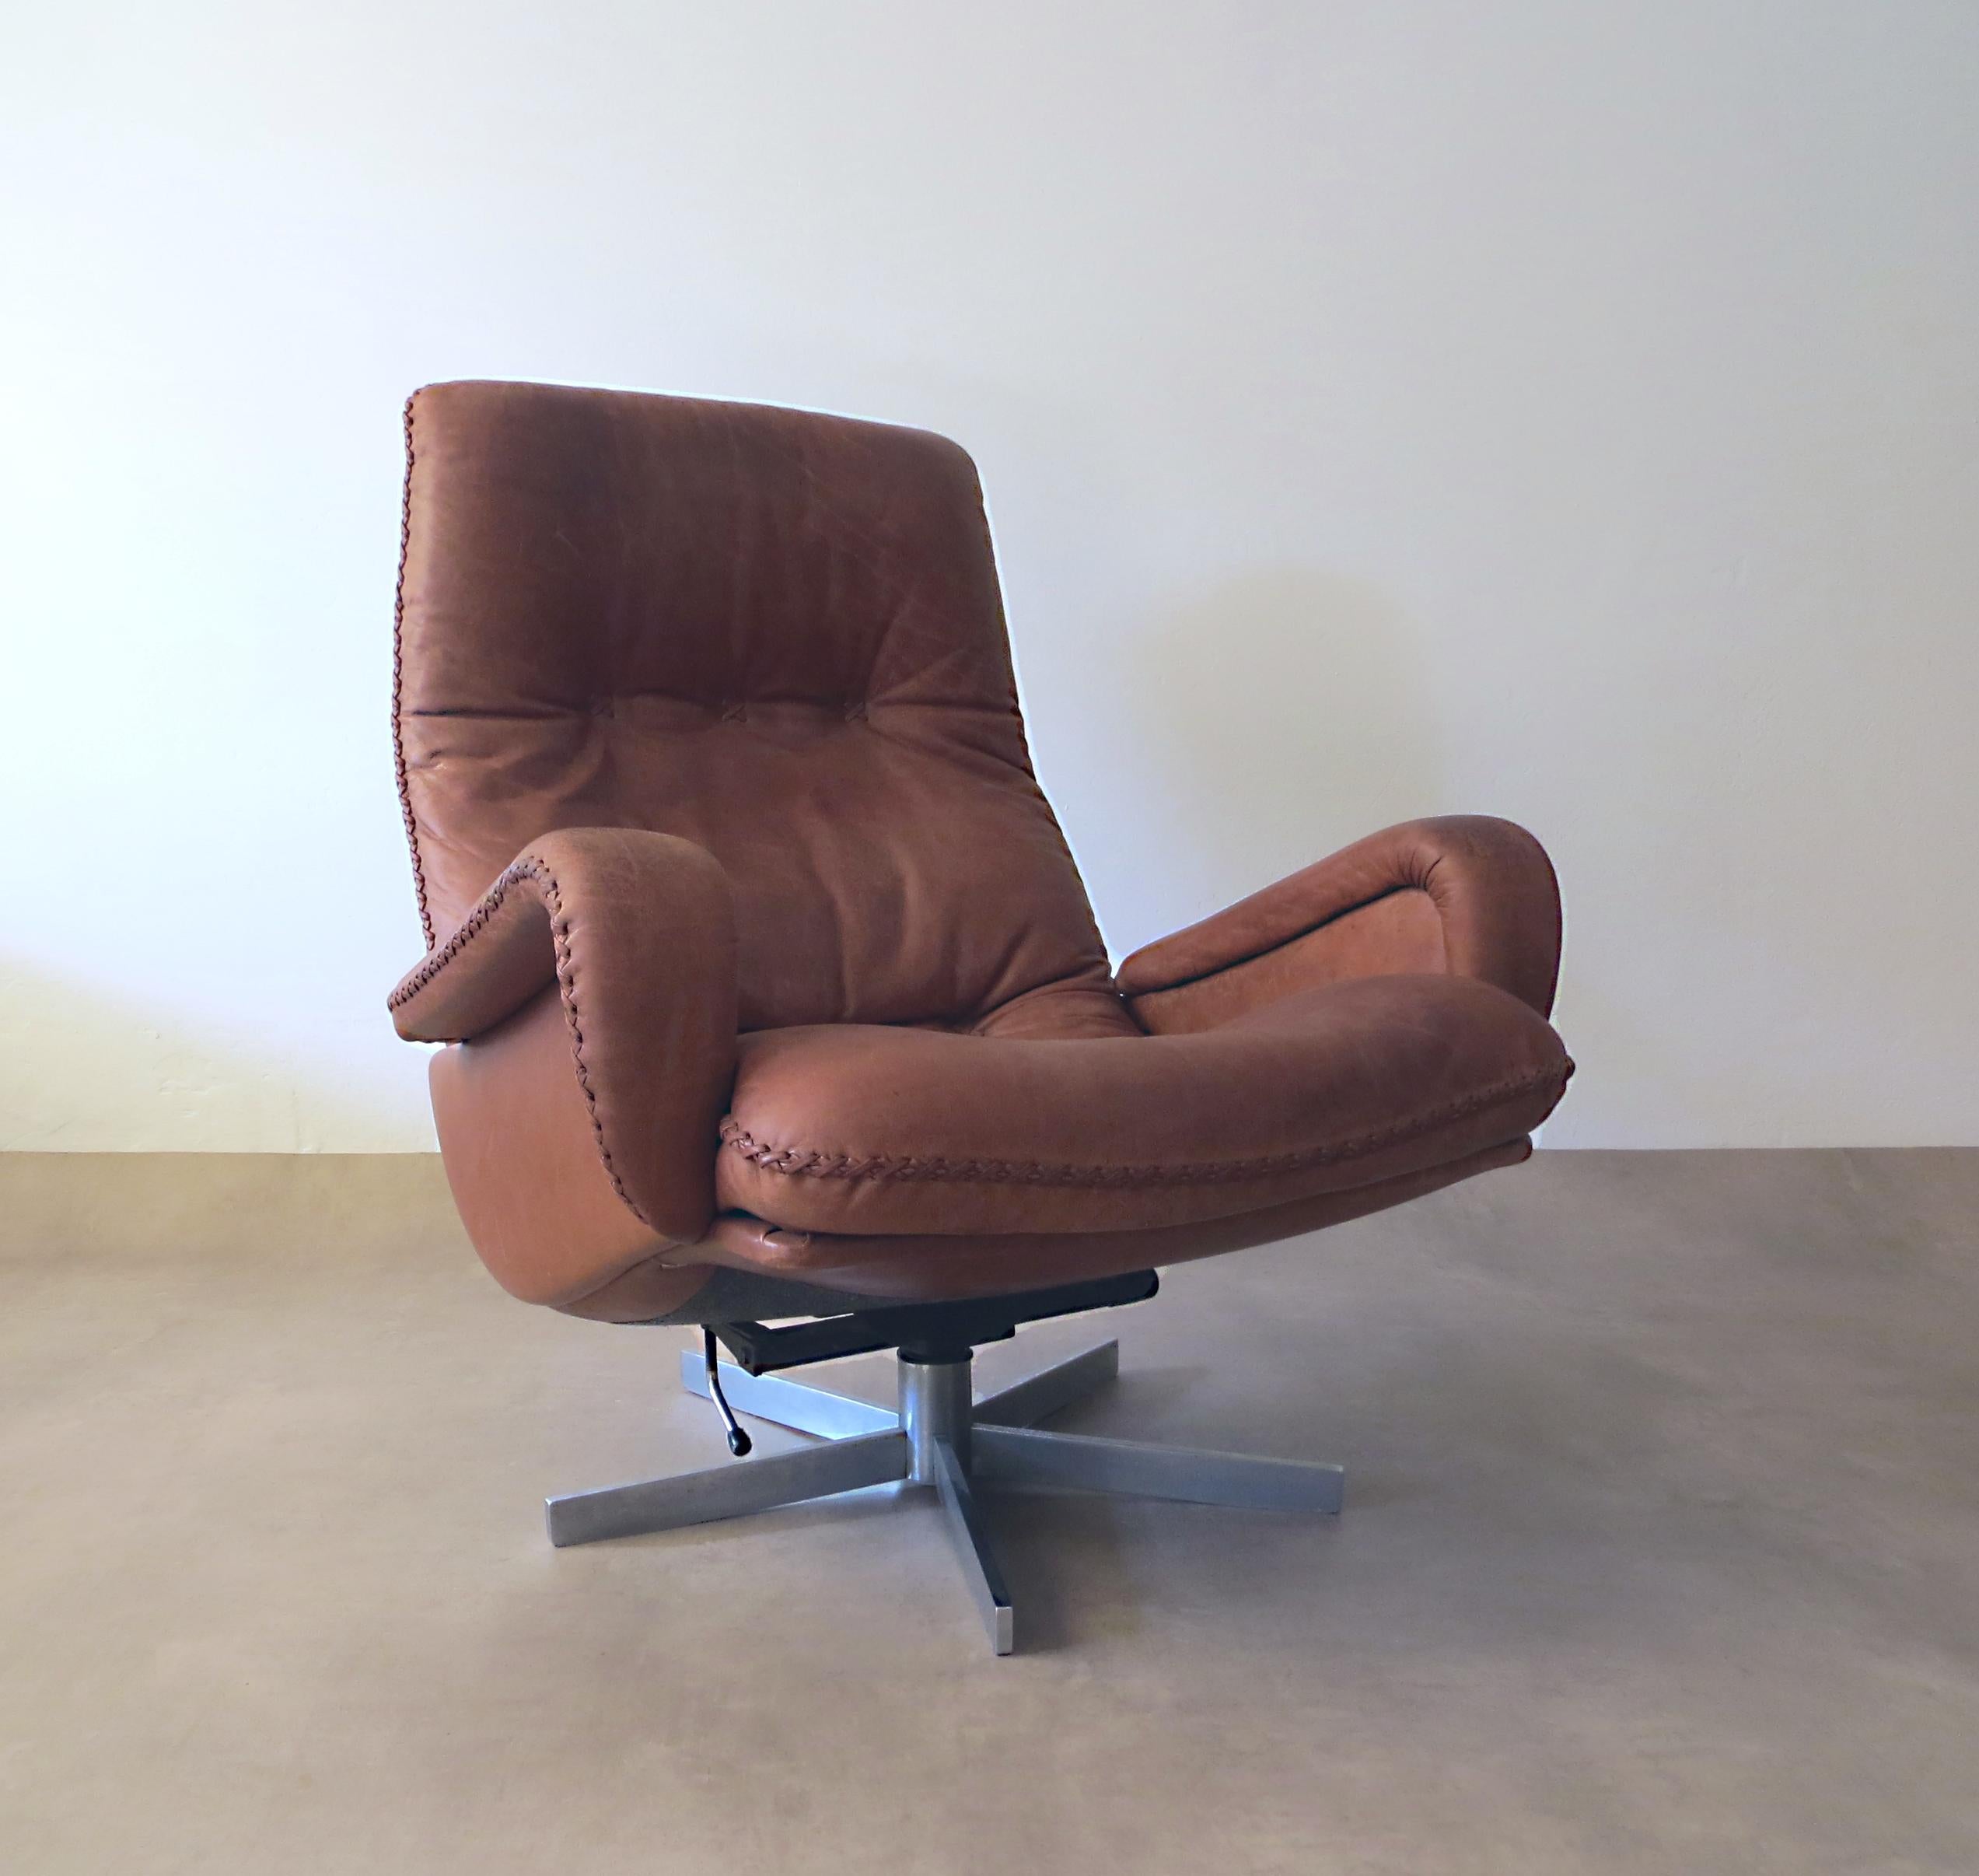 Mid-Century Modern leather lounge / club chair from the renowned, leather manufacturer De Sede ( Switzerland ) comes in light chocolate brown and is of highest quality and comfort.
The timeless S231 swivel chair is from 1960s and was featured in a